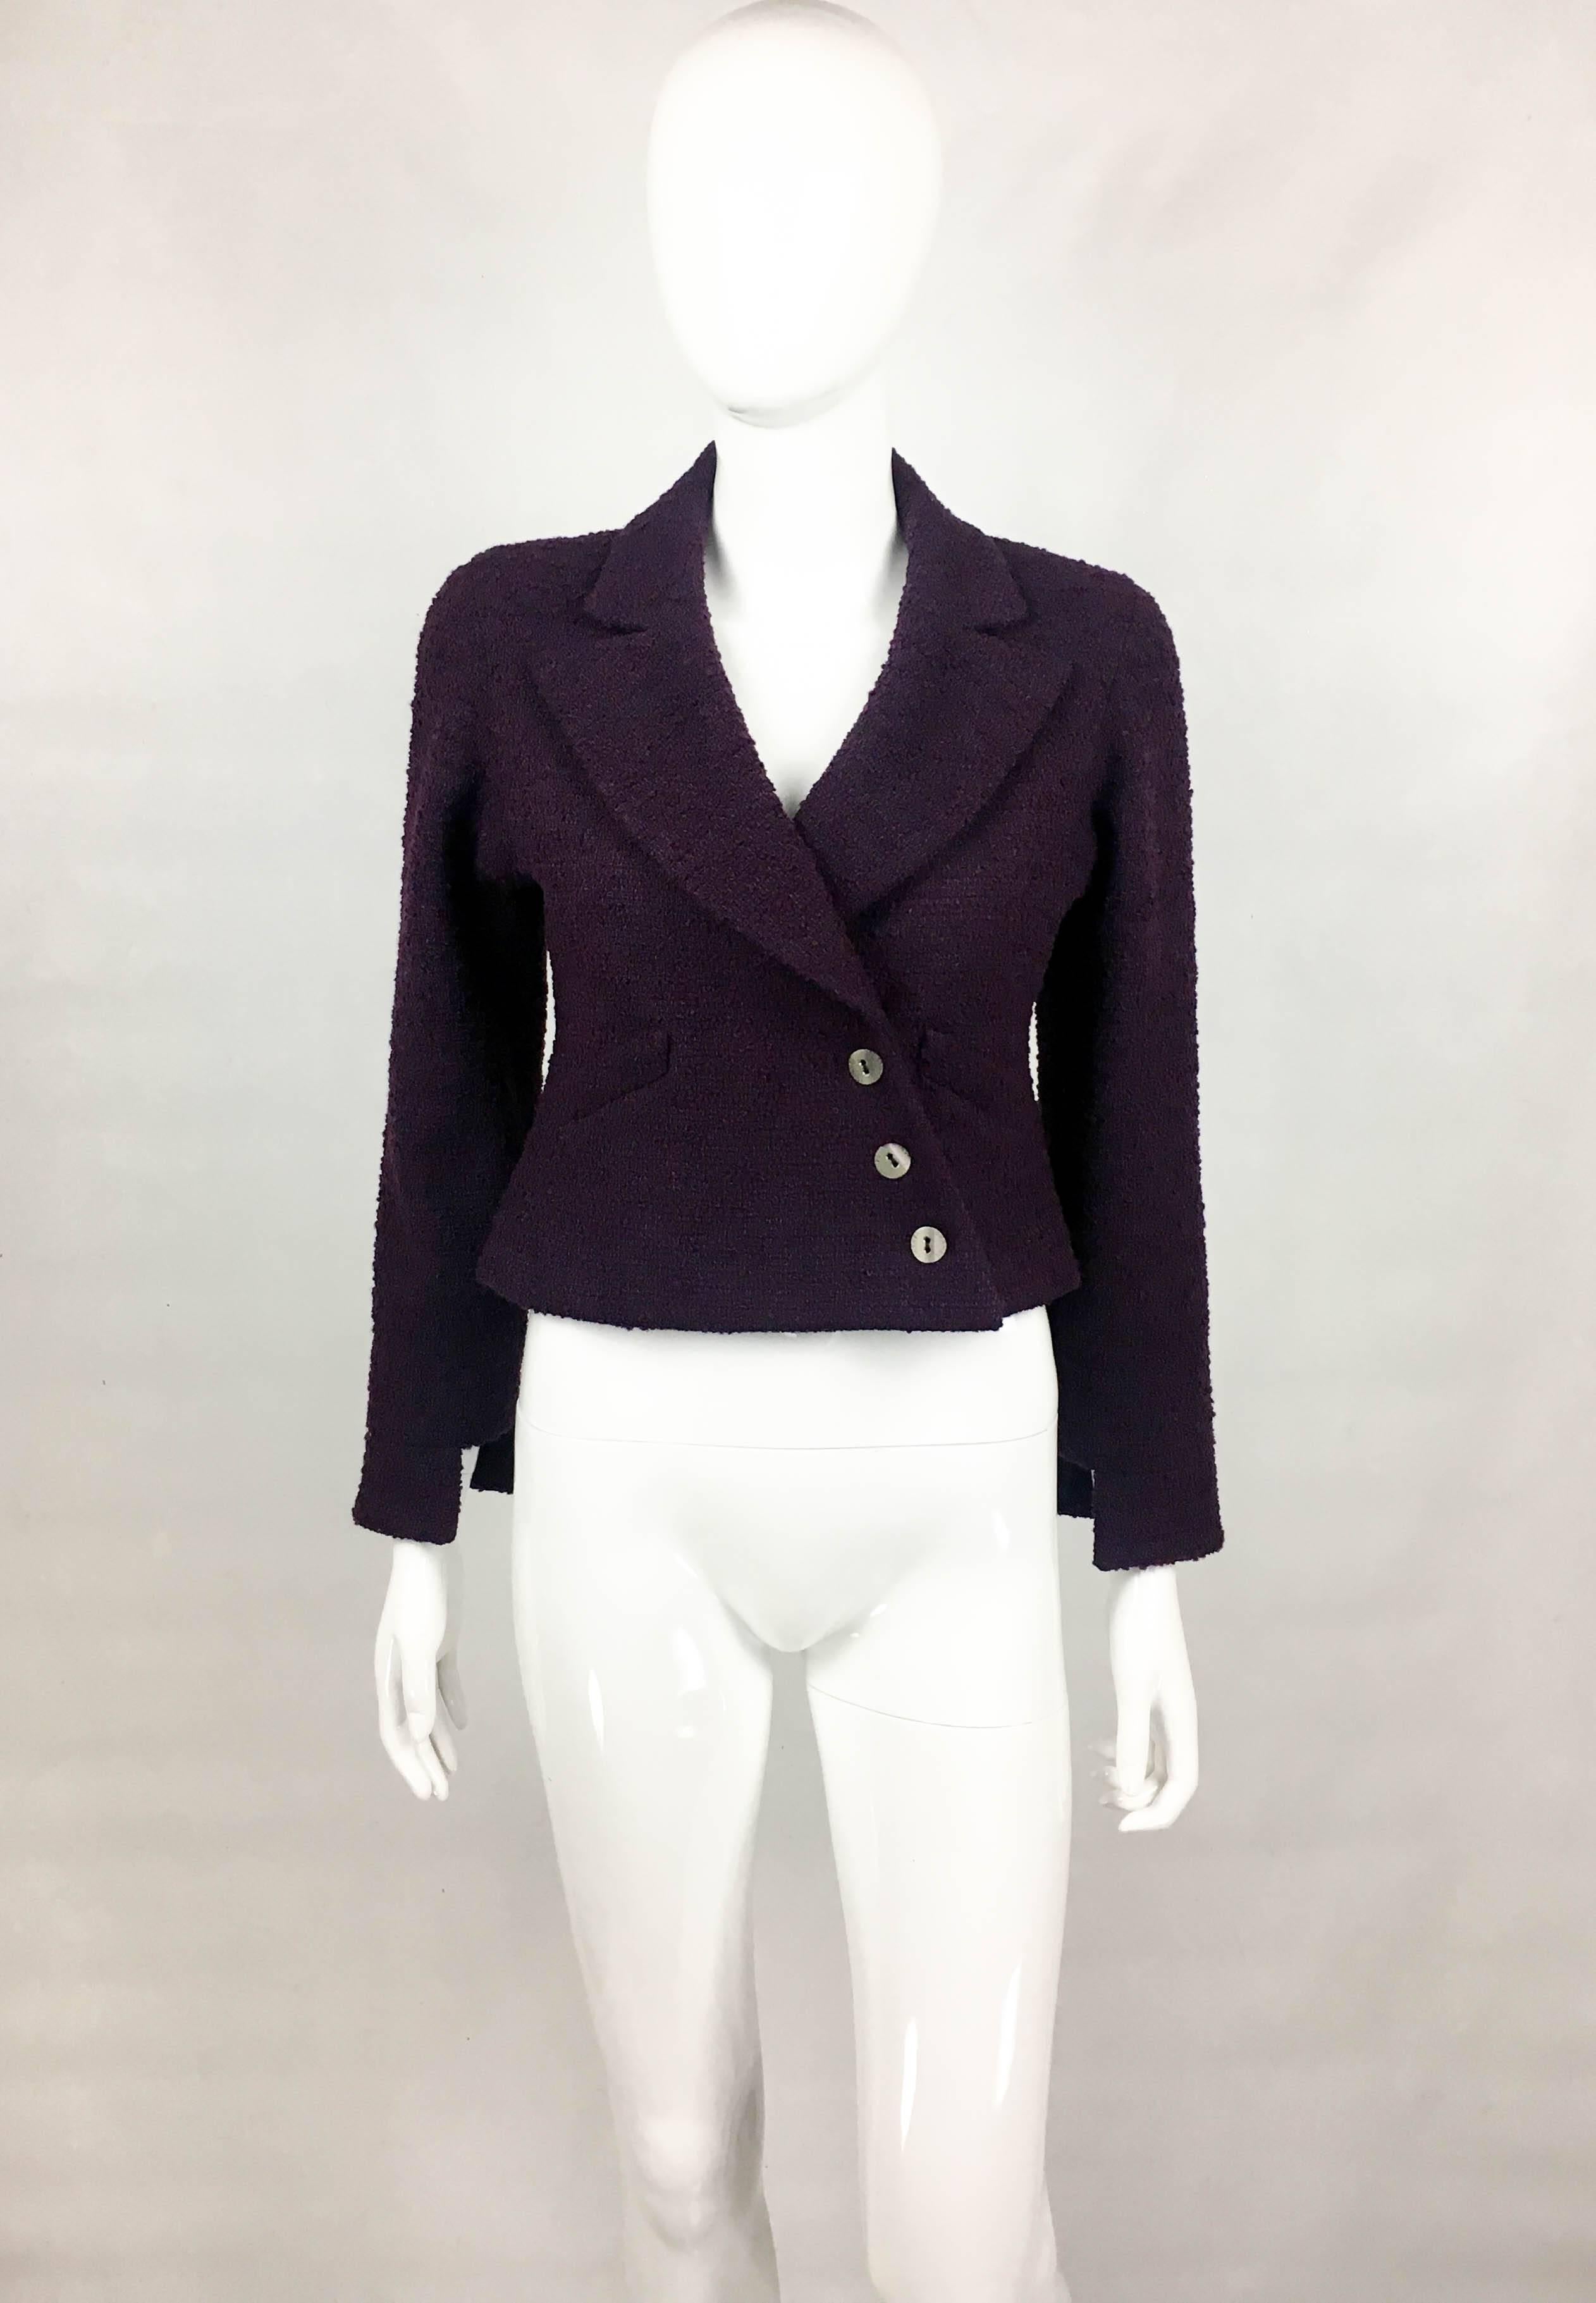 Chanel Deep Purple Bouclé Cropped Jacket. This striking jacket by Chanel is from the 2001 Fall / Winter collection. In deep purple bouclé, it has hoof cuffs, defined waist and asymmetric fastening. The buttons are silver-tone, curved and say